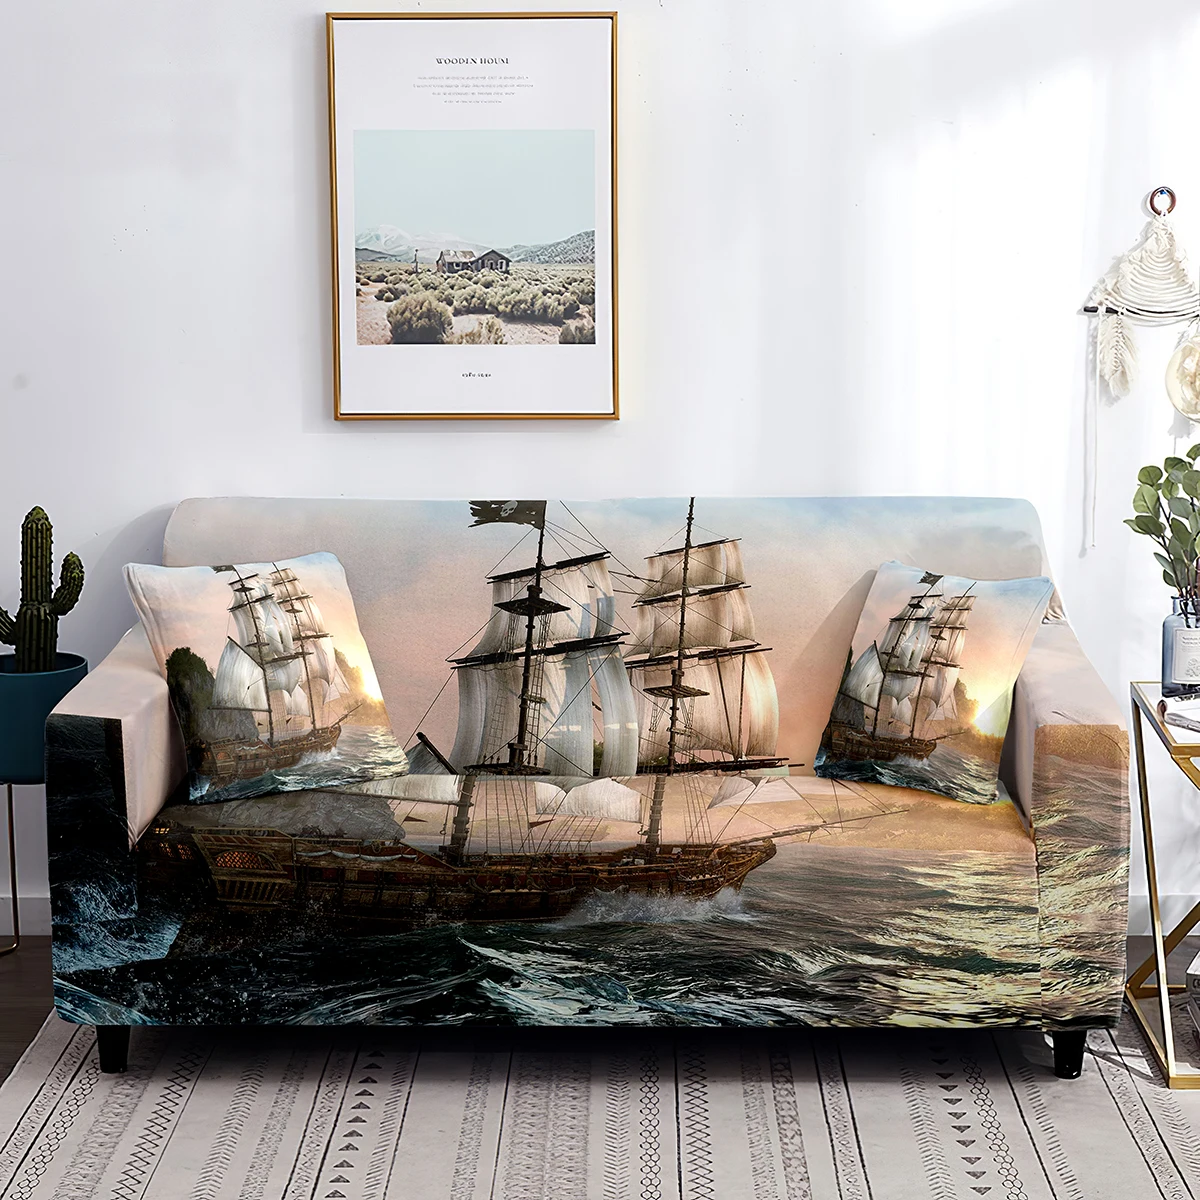 

Nautical Stretch Sofa Cover Pirate Yacht Adventure Theme Couch Cover Slipcover Ocean Pattern Furniture Protector From Dust Stain